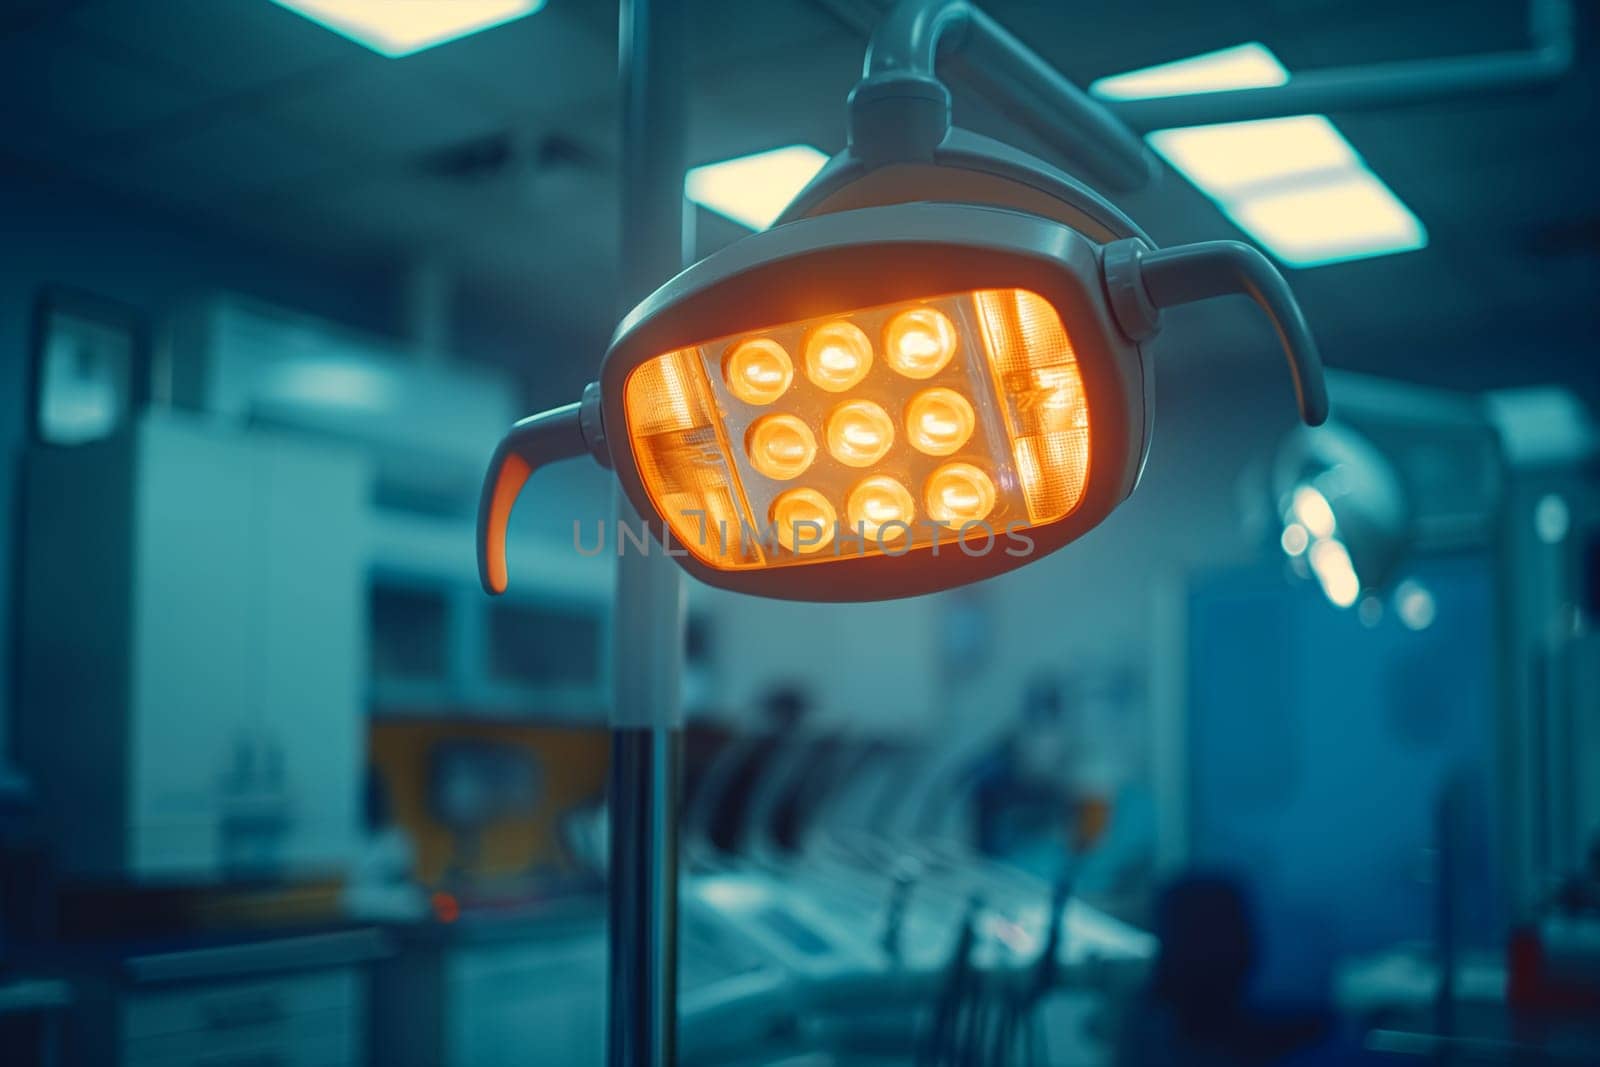 A dentist chair with a bright light above it, ready for dental procedures in a clinical setting.